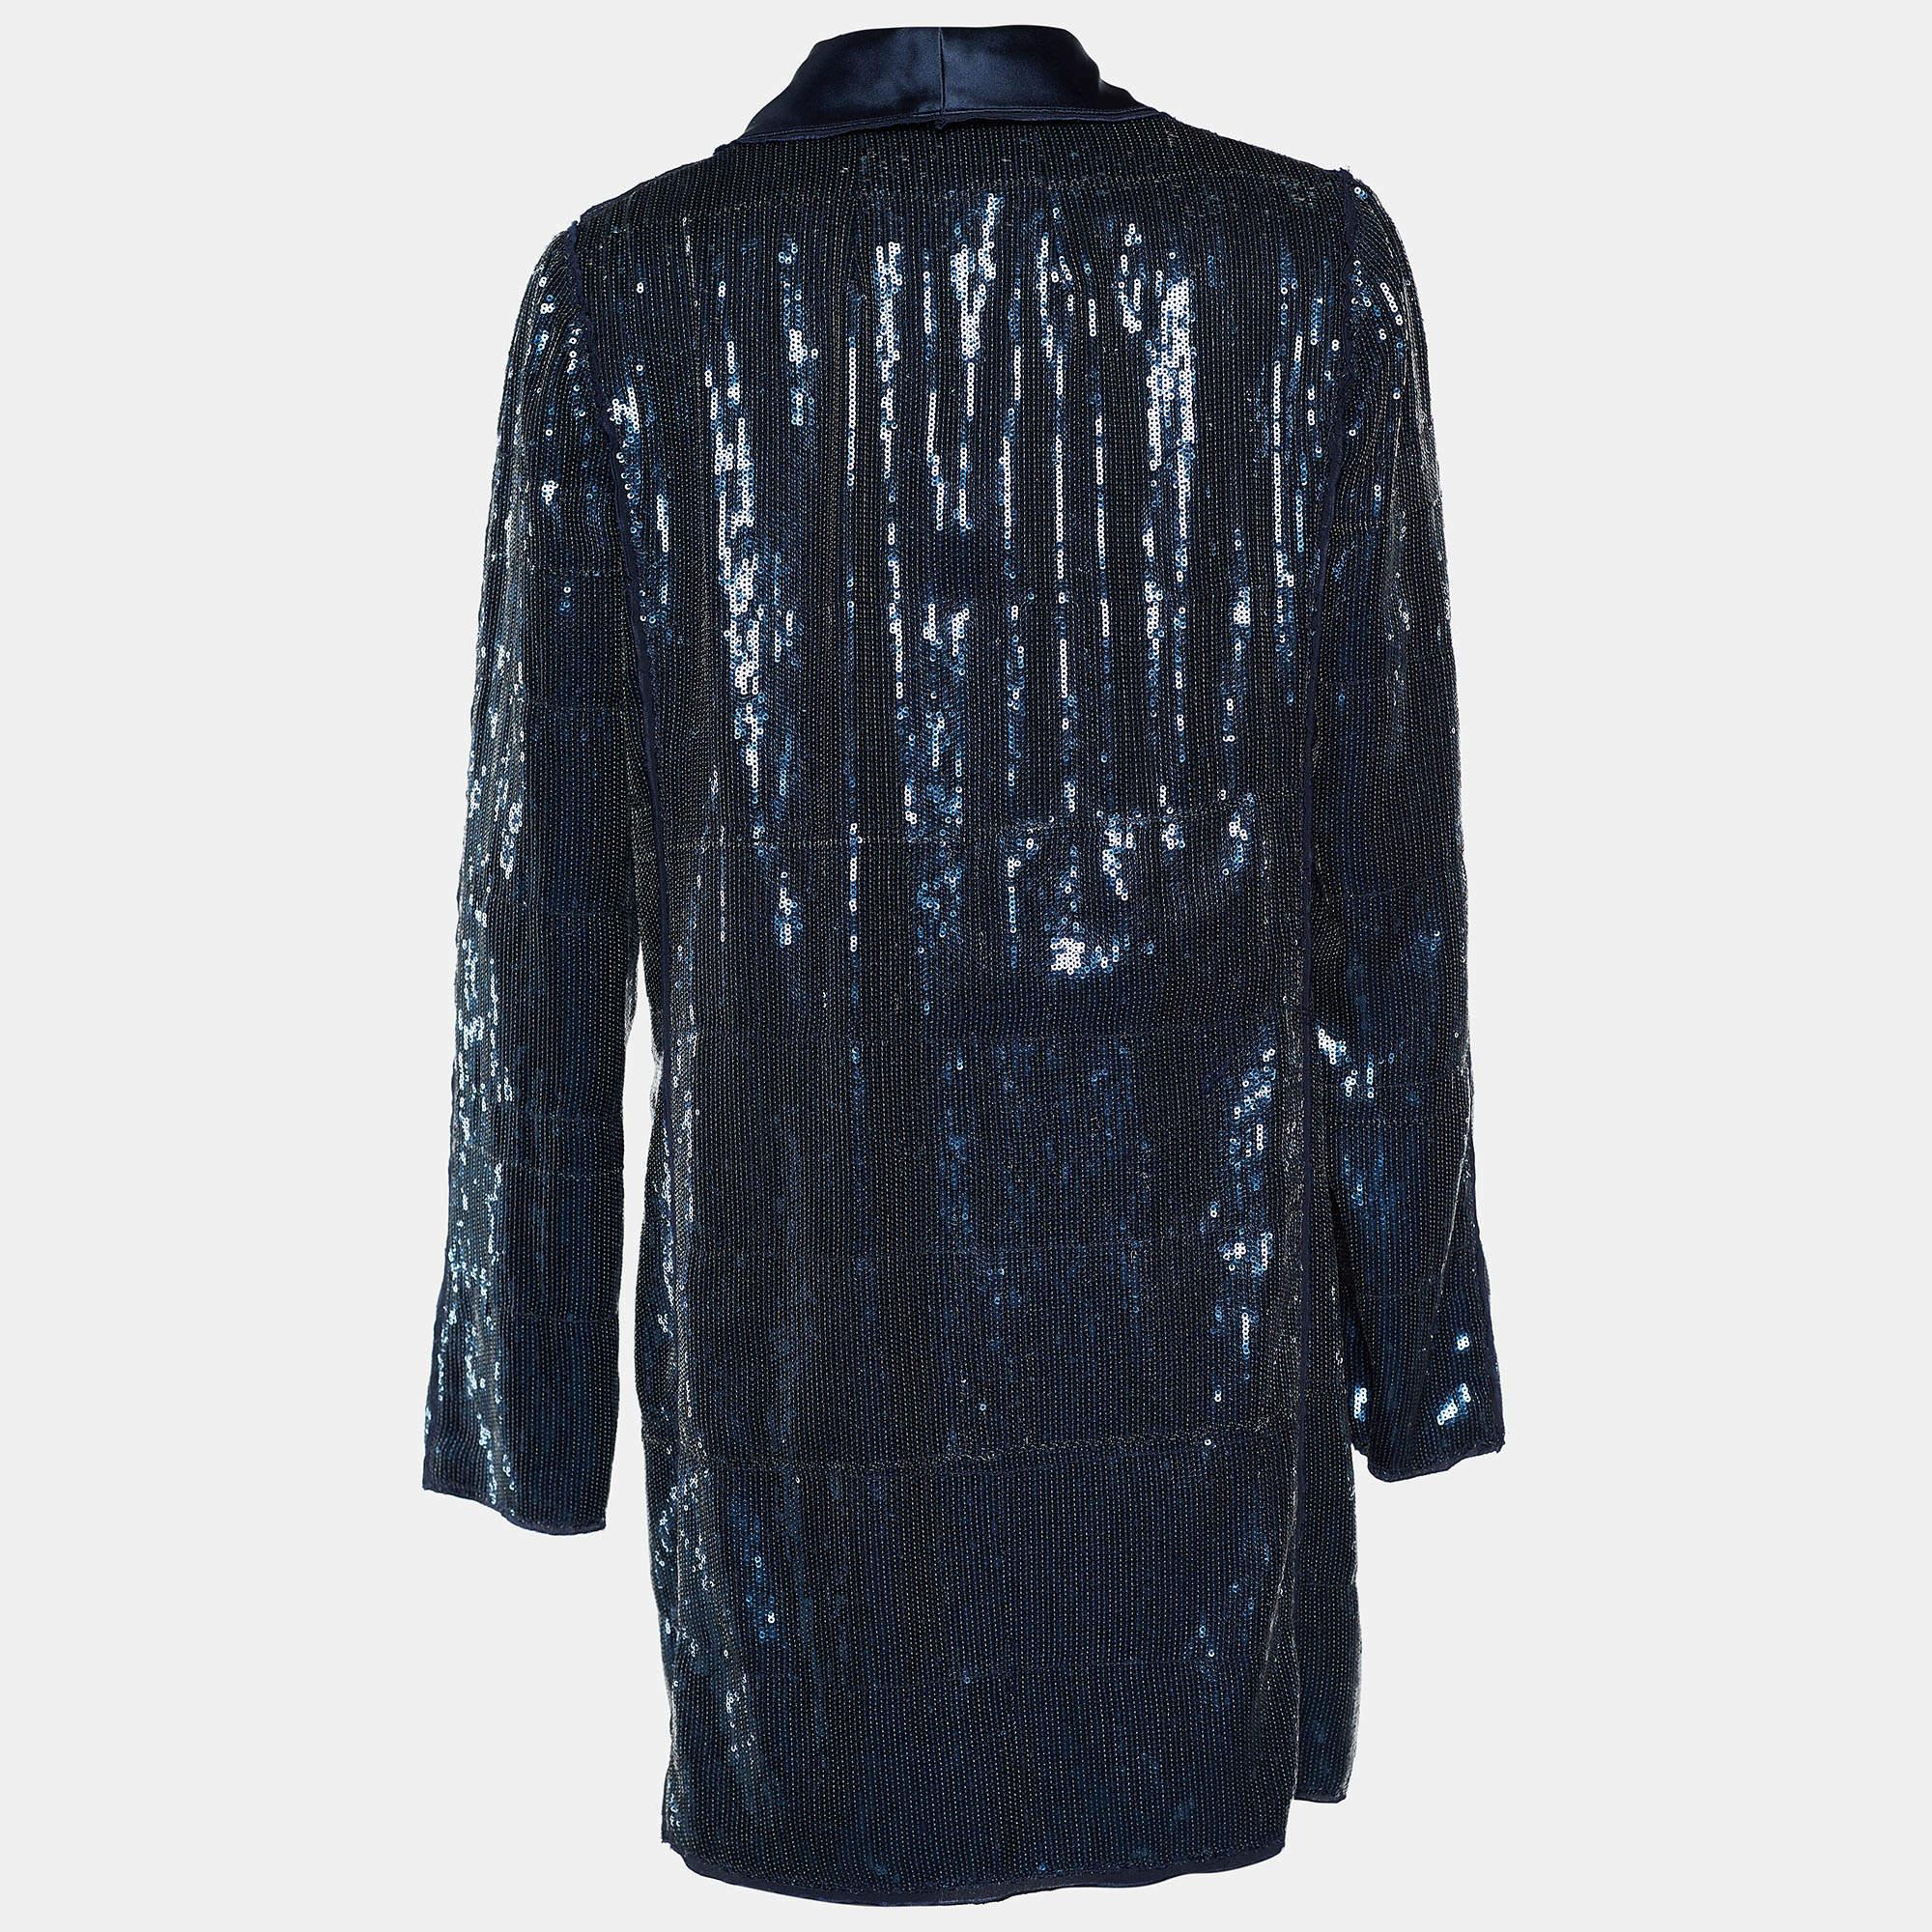 Shine through the evening as you wear this fabulous blazer from the House of Dolce & Gabbana! Doused in sequins, this blue blazer has a long length with a single button closure on the front. It has long sleeves and accommodates two pockets to store